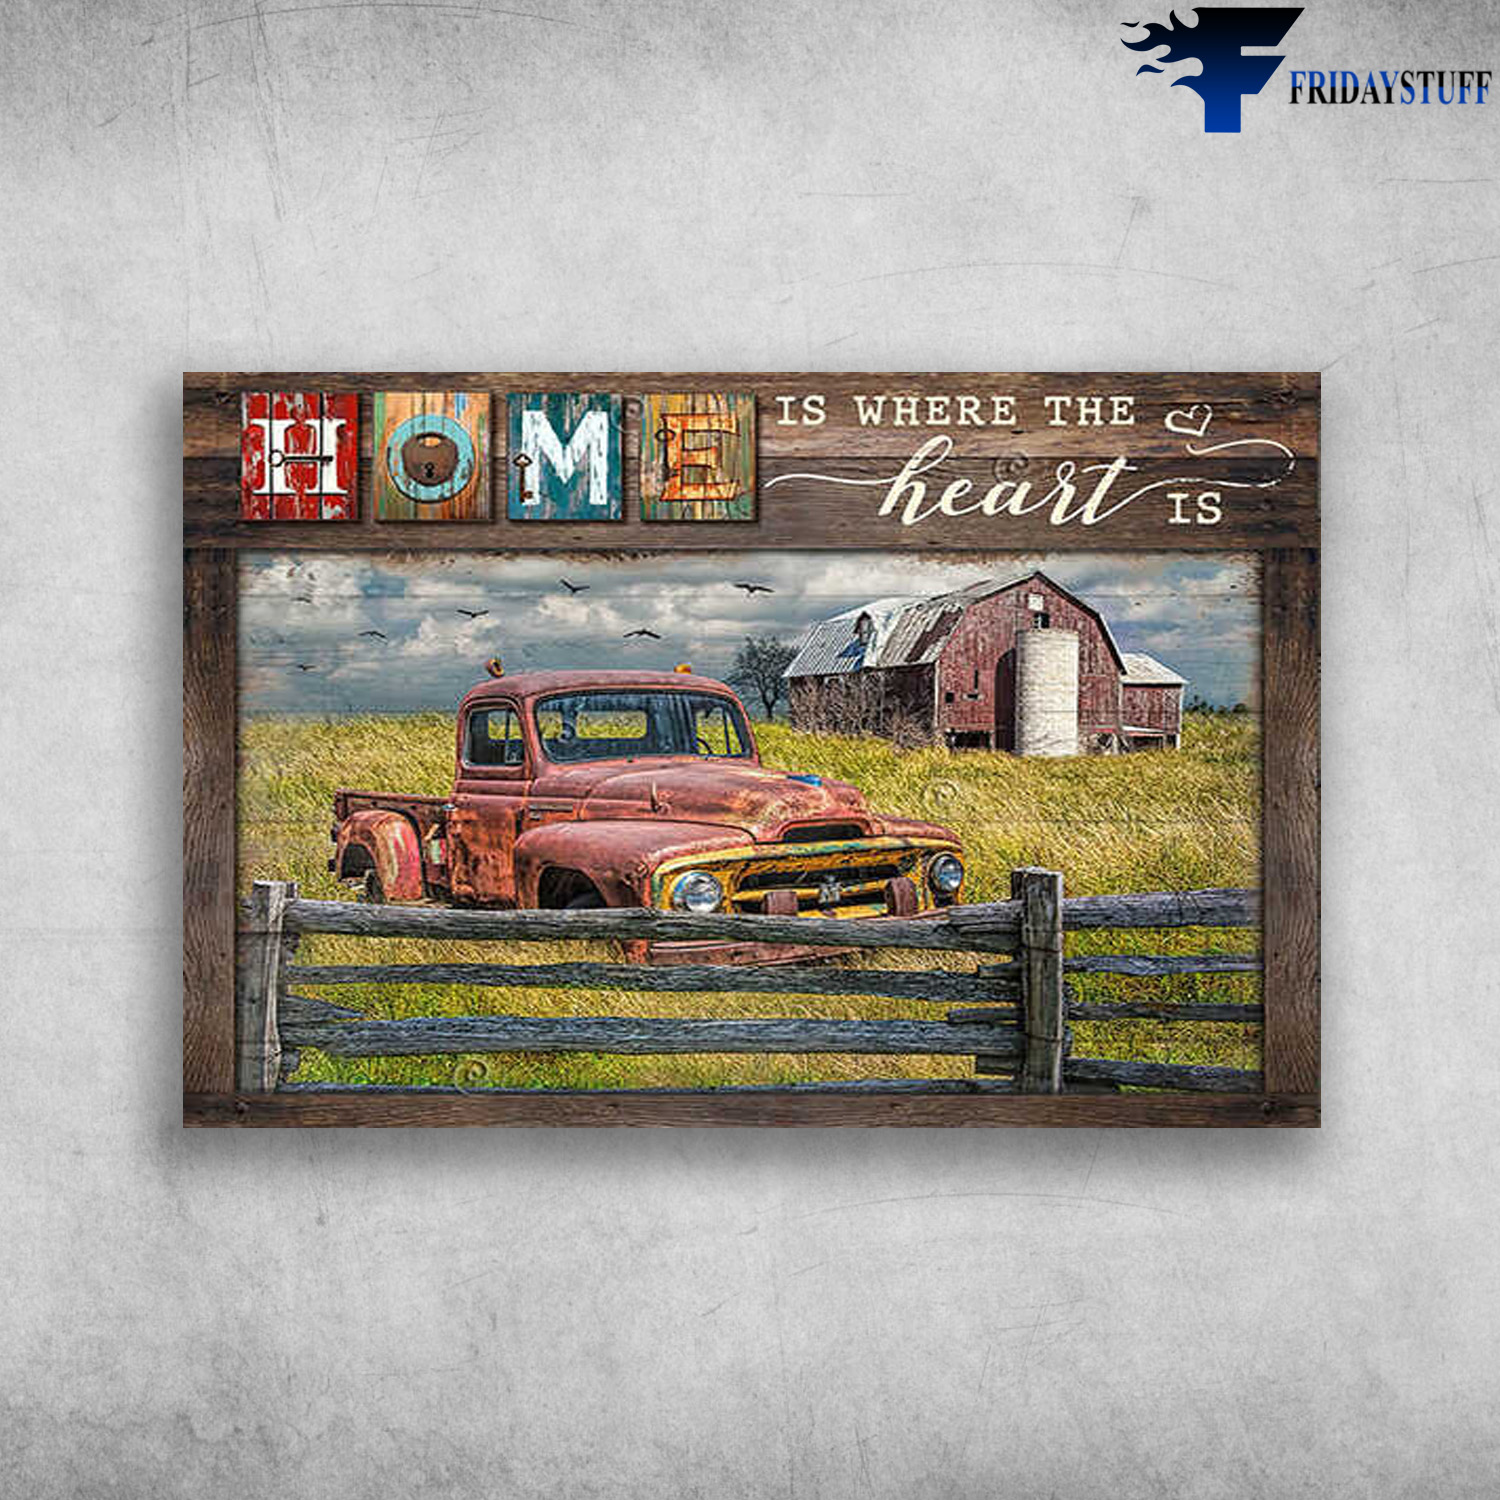 Rustic Barn And Truck - Home Is Where The Heart Is Rustic Barn And Truck